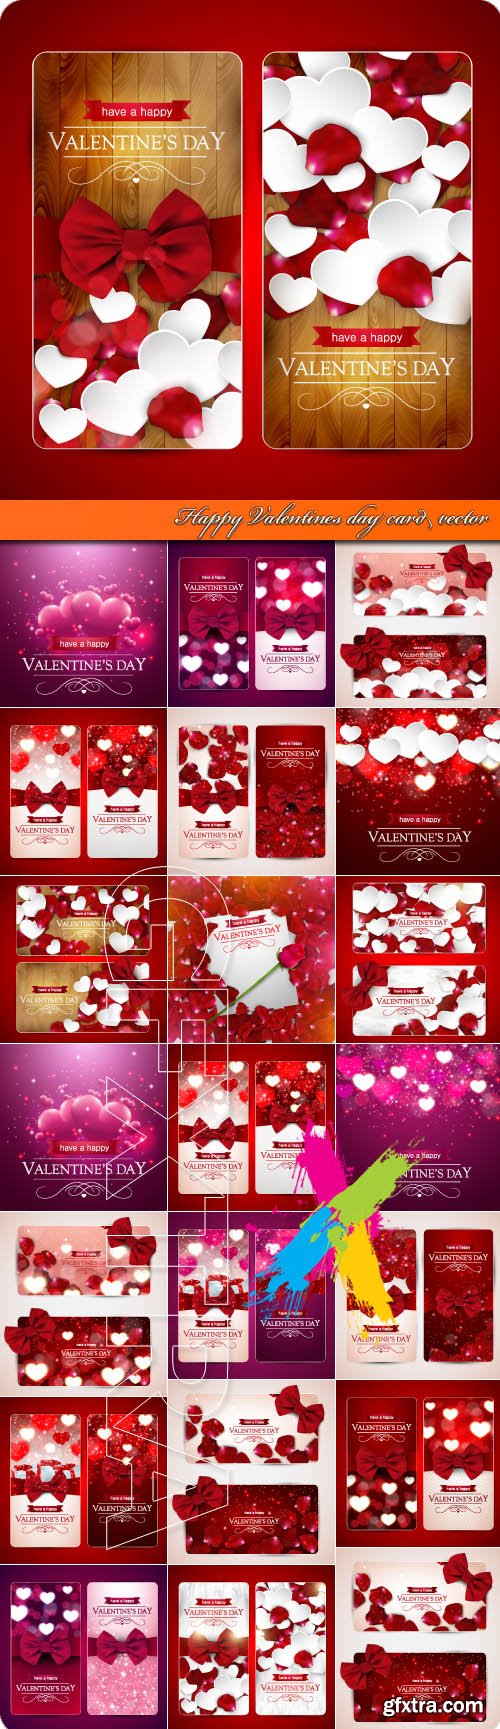 Happy Valentines day card vector